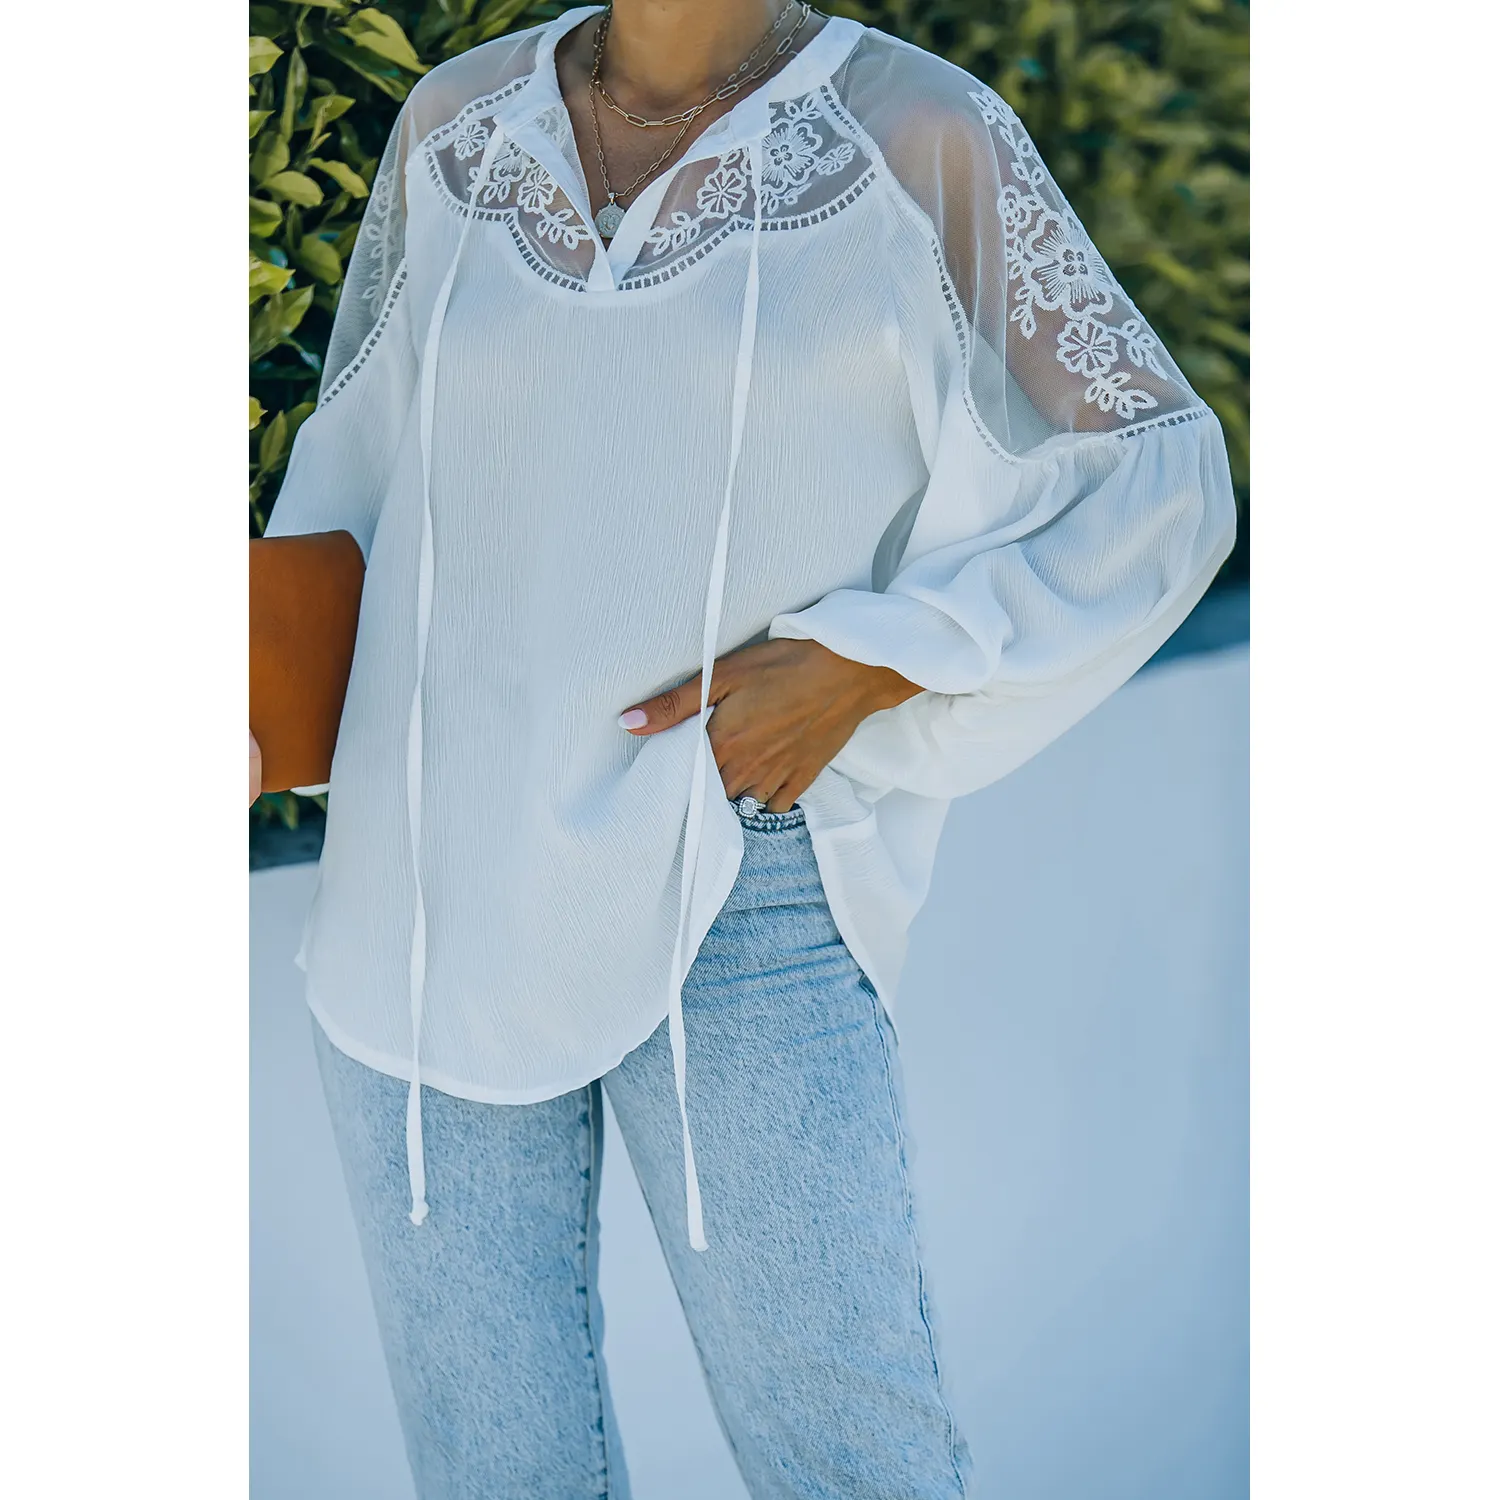 Popular On Online Gauzy Neckline White Relaxed Fit Ladies Lace Blouse